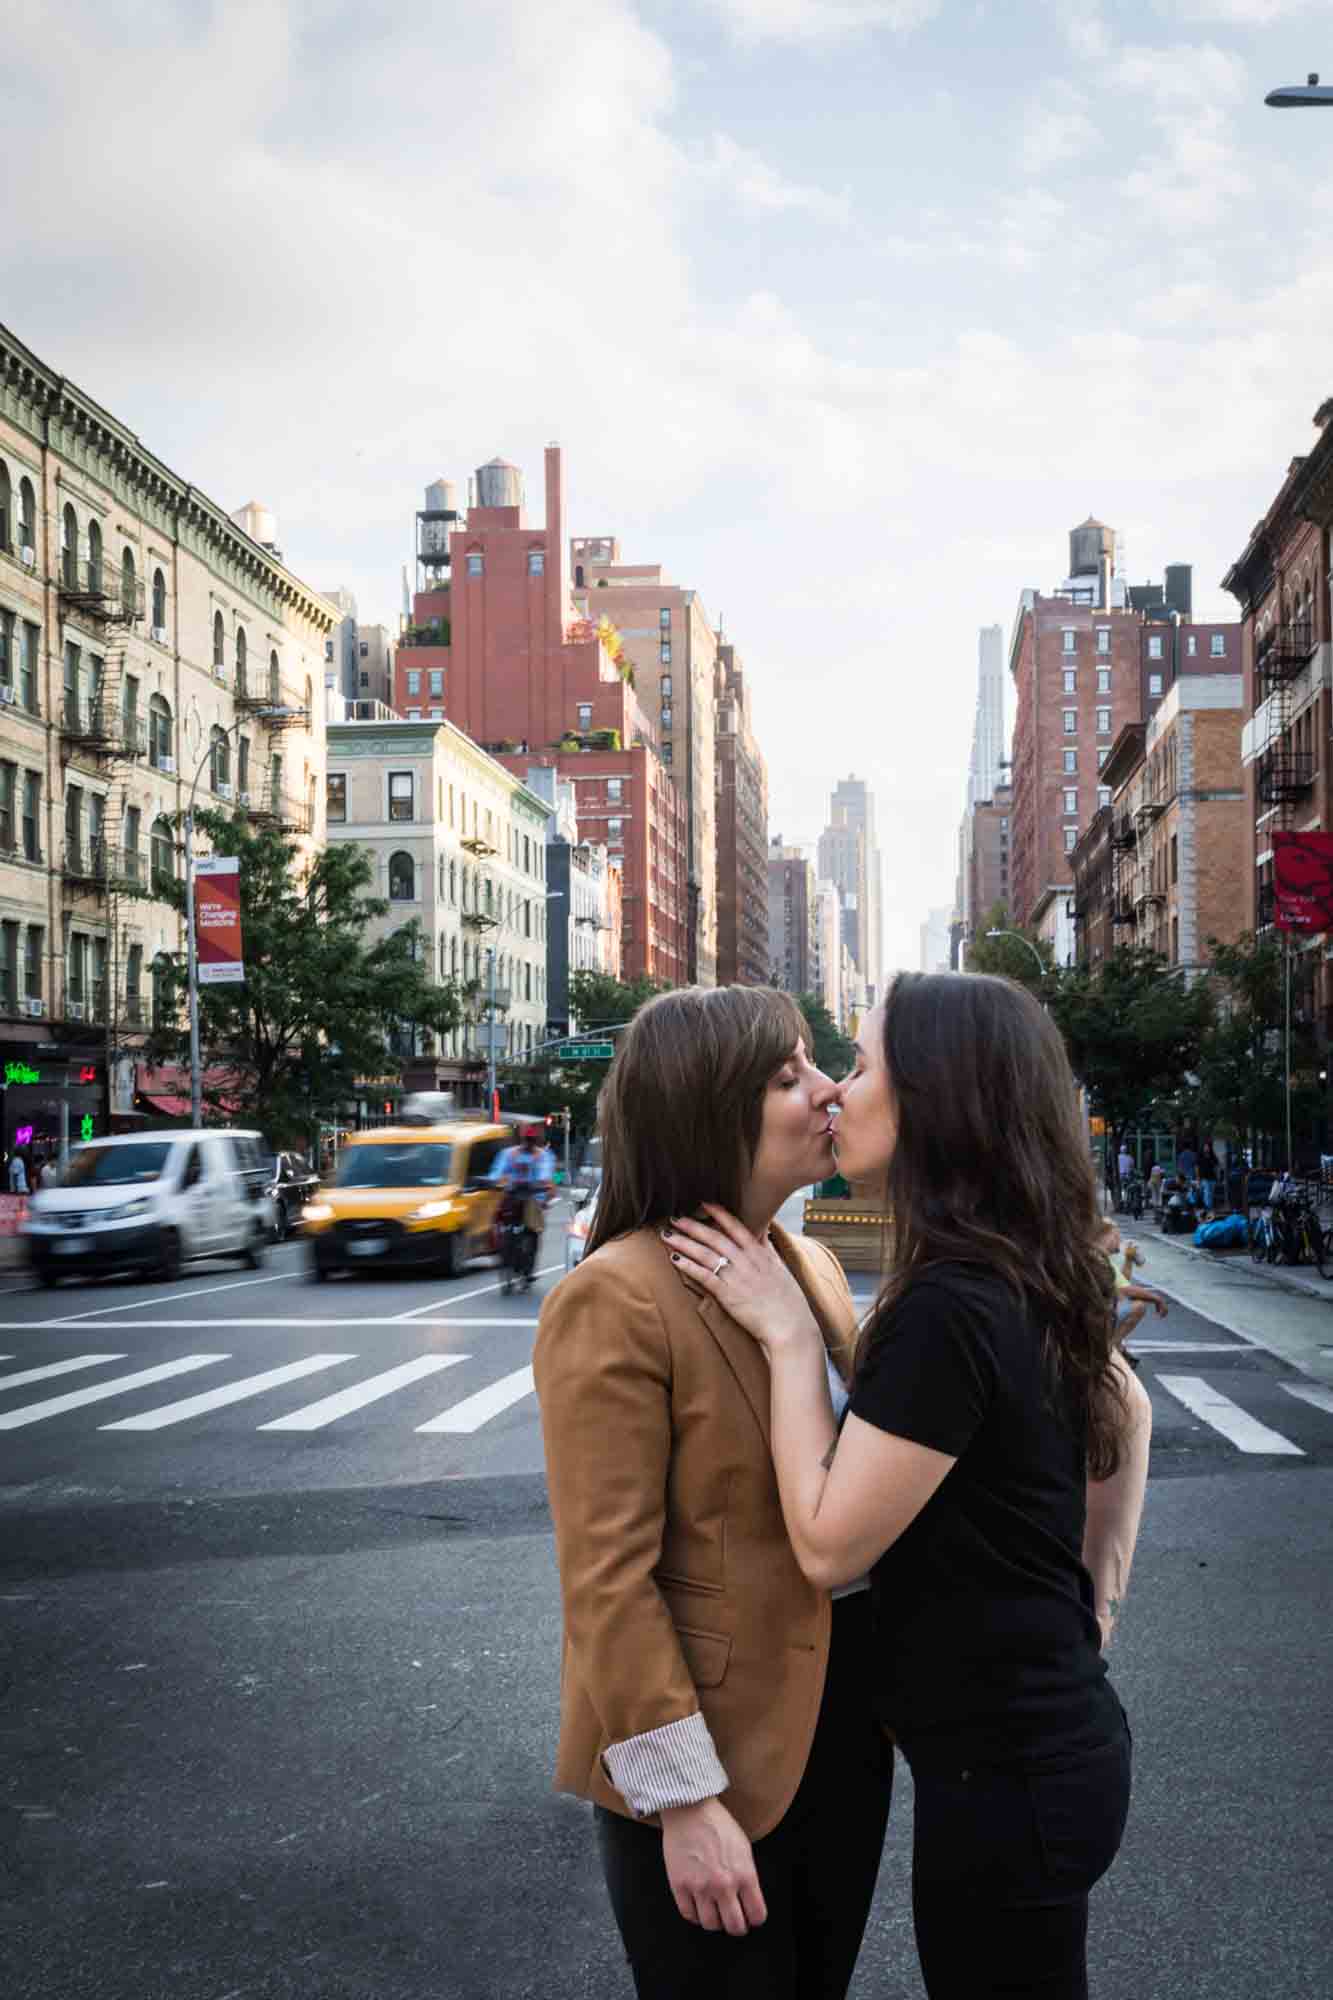 Two women kissing in a NYC roadway with traffic and apartment buildings in the background